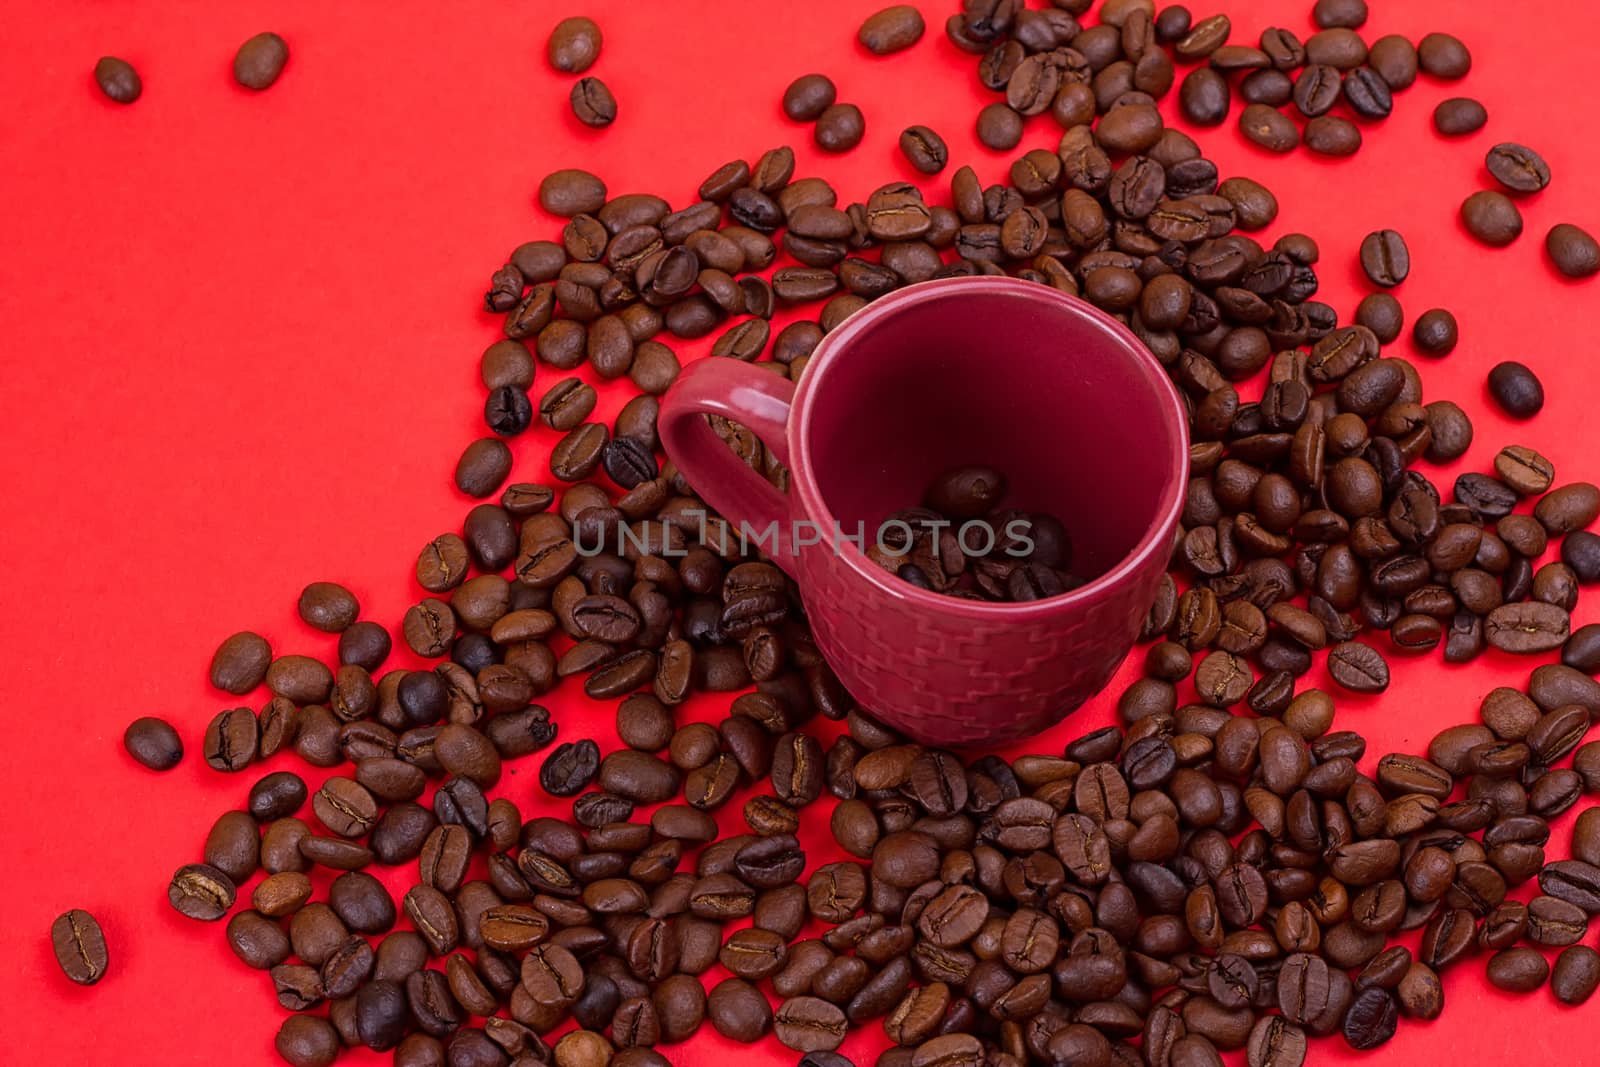 Empty coffee cup and coffee beans by victosha